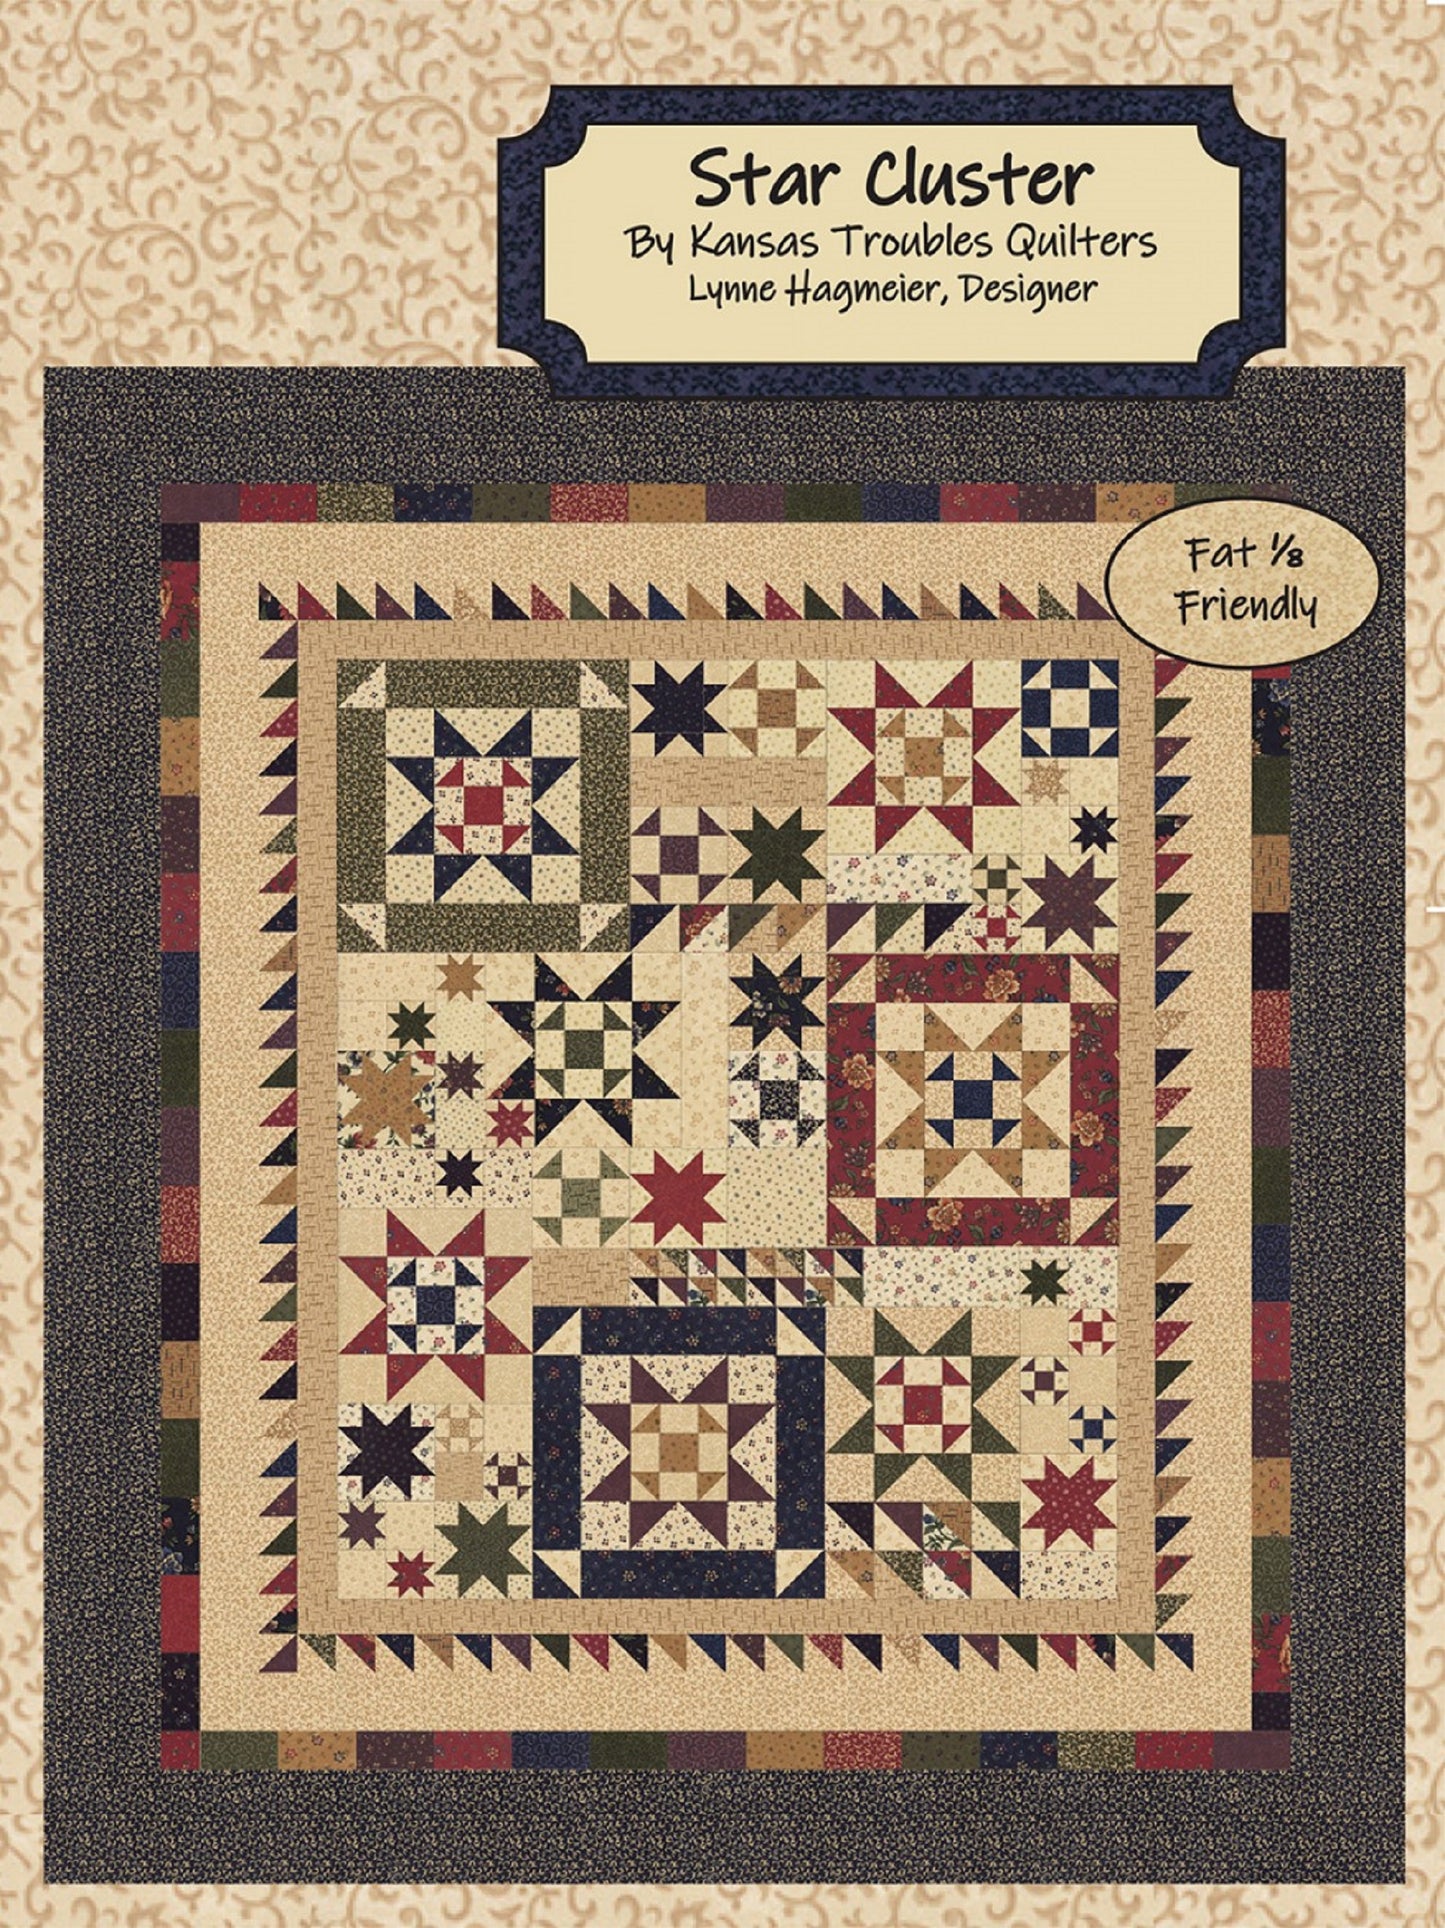 Star Cluster Quilt Pattern-Kansas Troubles Quilters